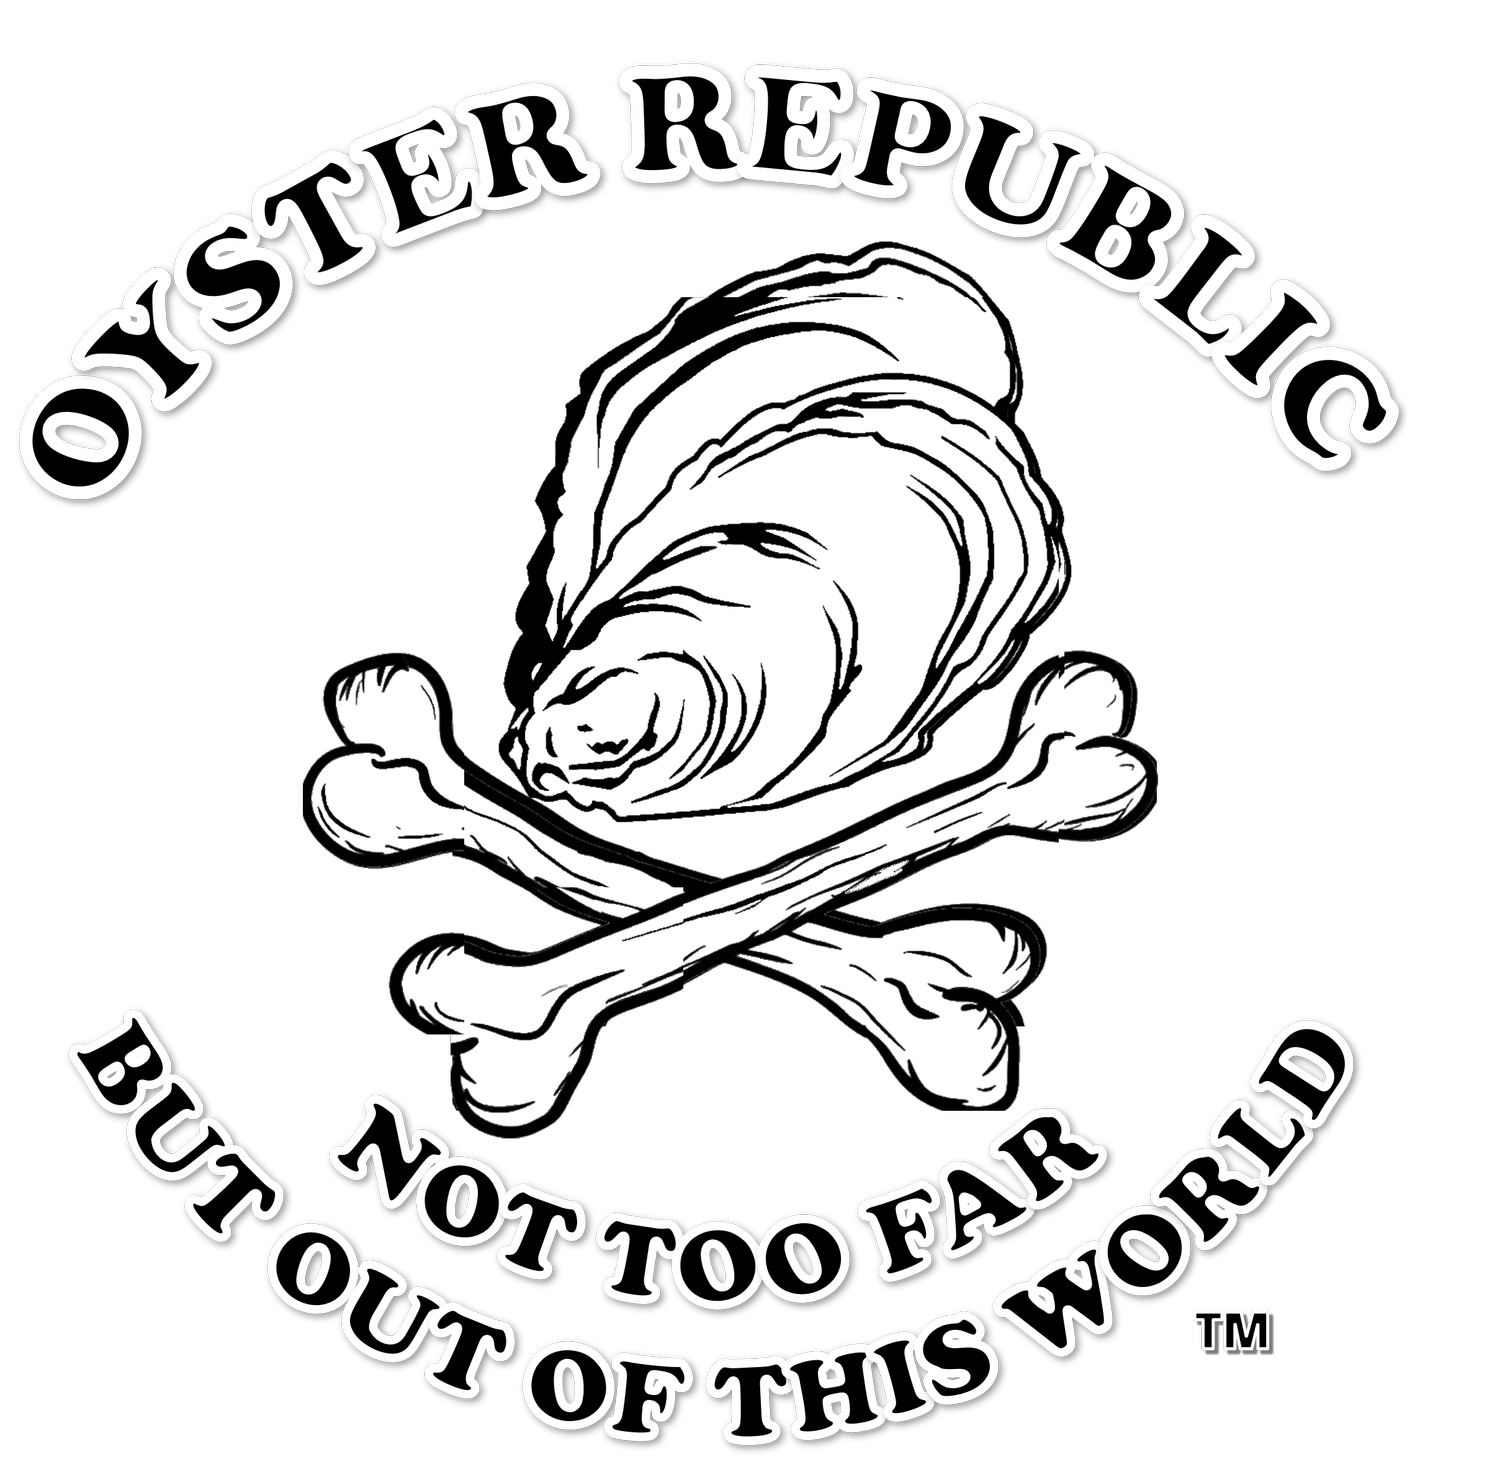 Oyster Republic T-Shirts, Apparel, and Accessories.